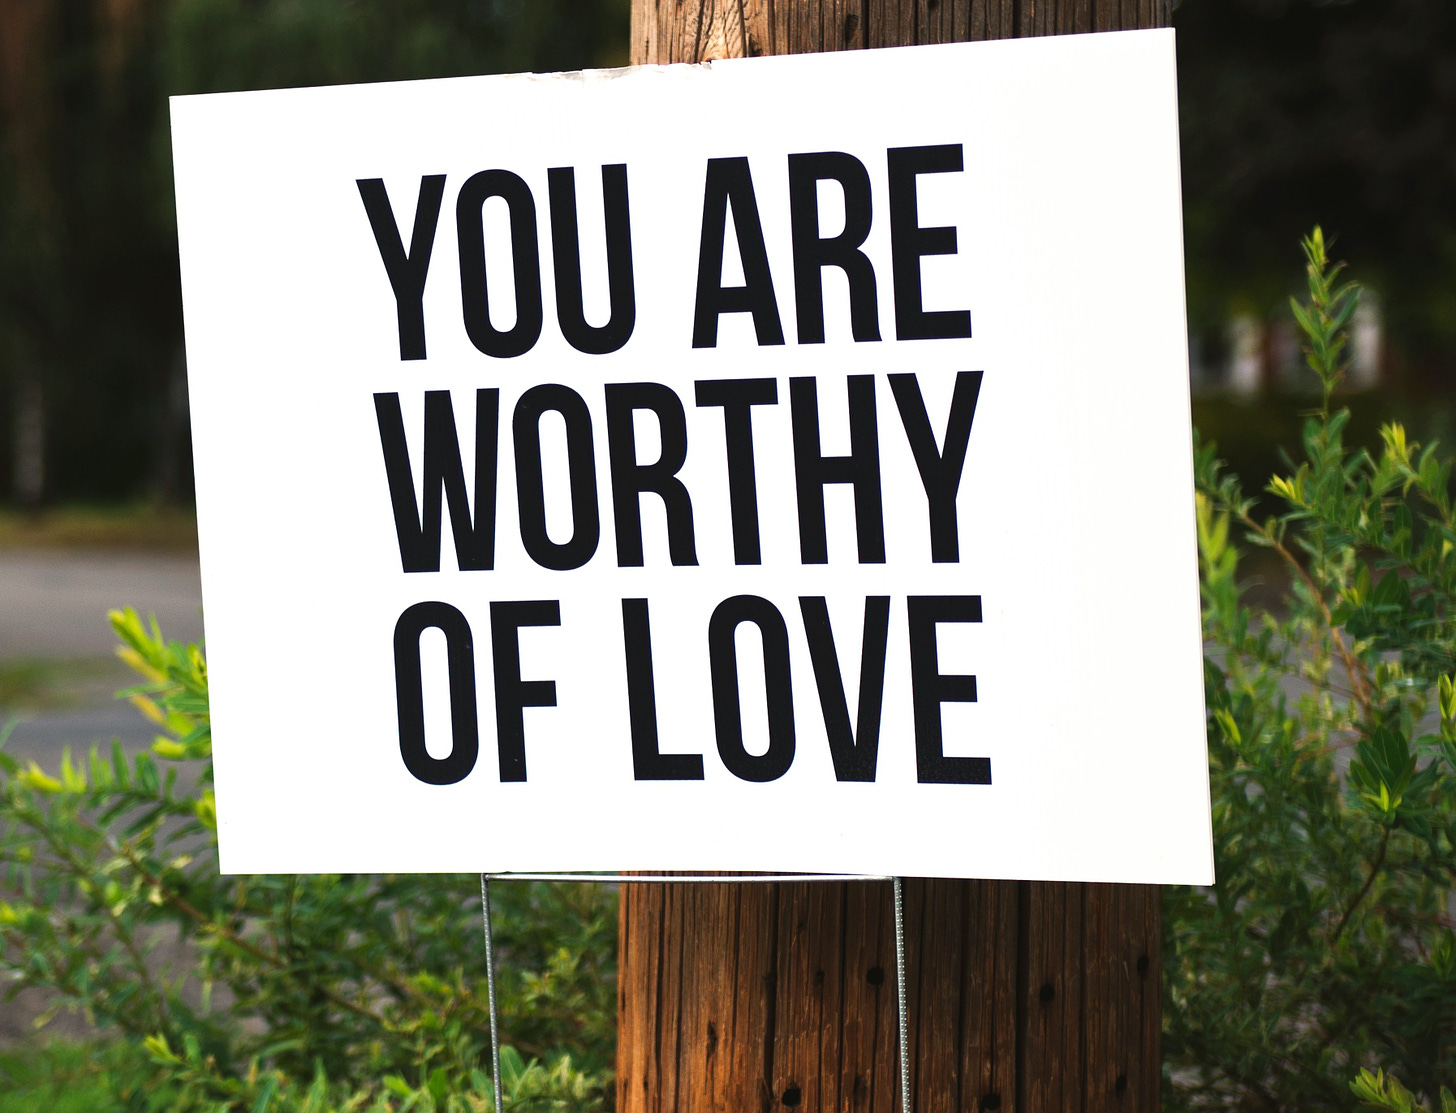 Sign reading "You are worthy of love"